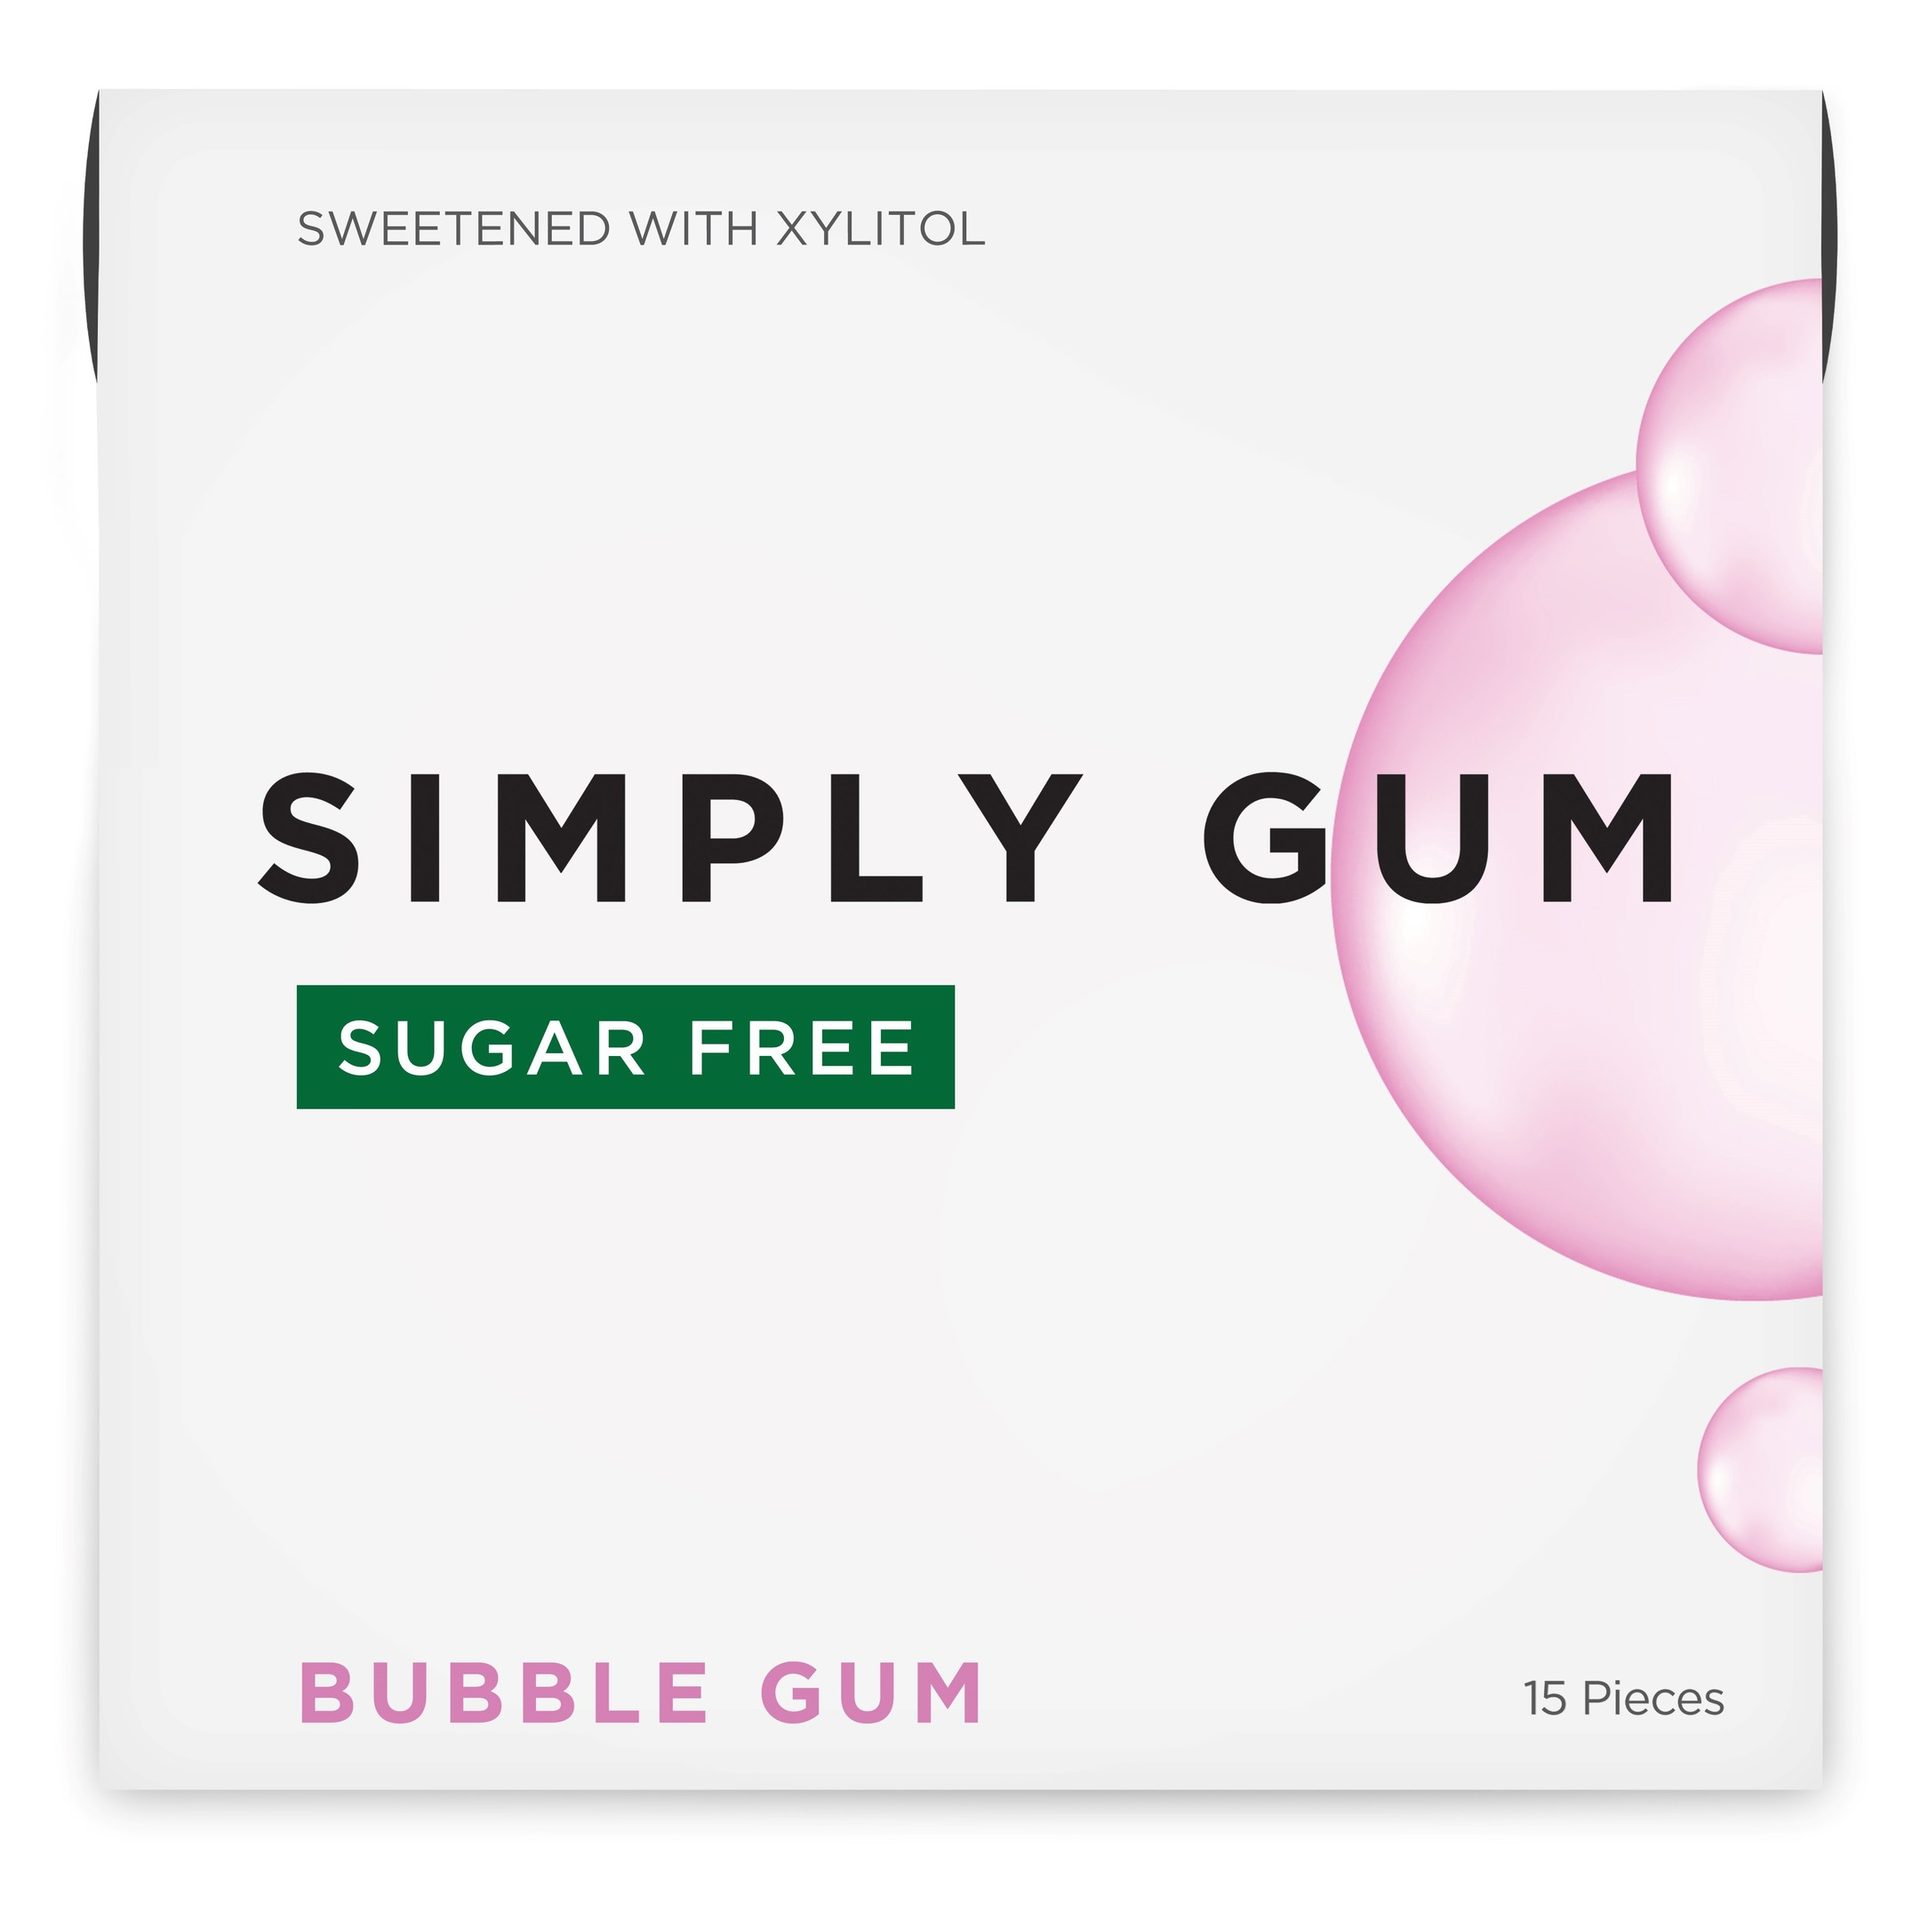 Font, White package, Pink bubbles, Green label